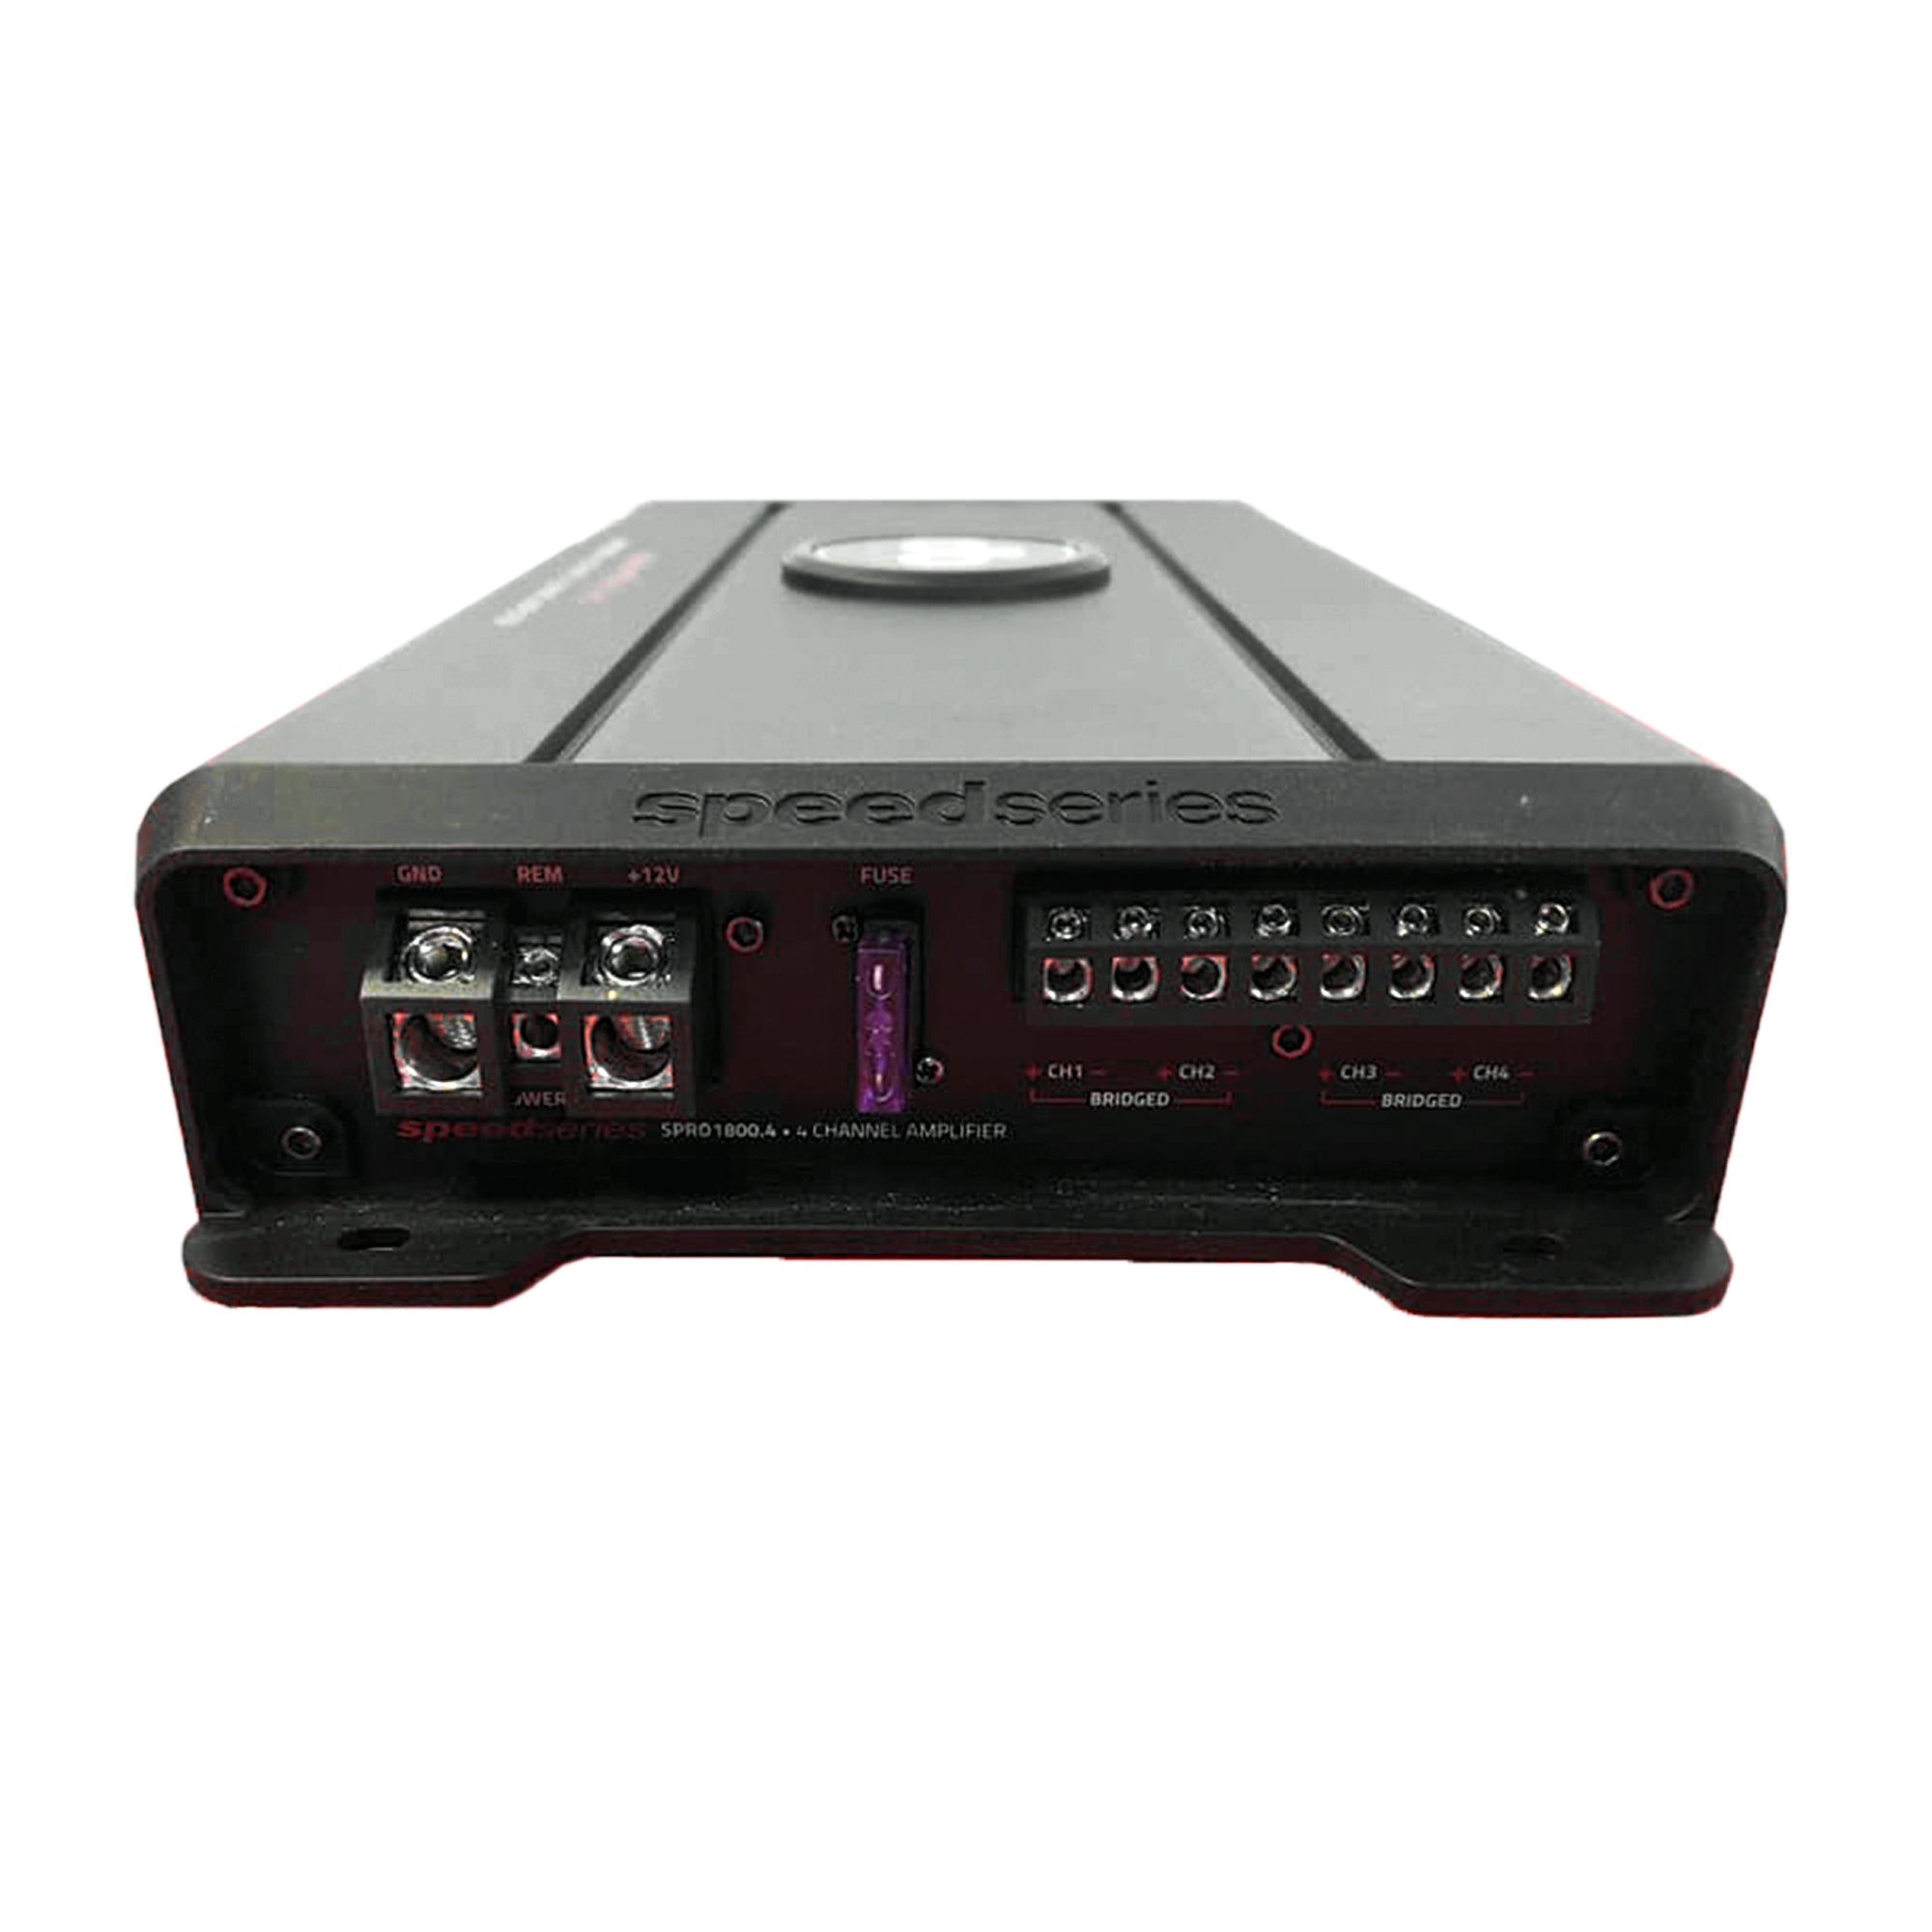 Amplificador 4 Canales DB Drive SPRO1800.4 1800 Watts Clase AB 2 Ohms Speed Series